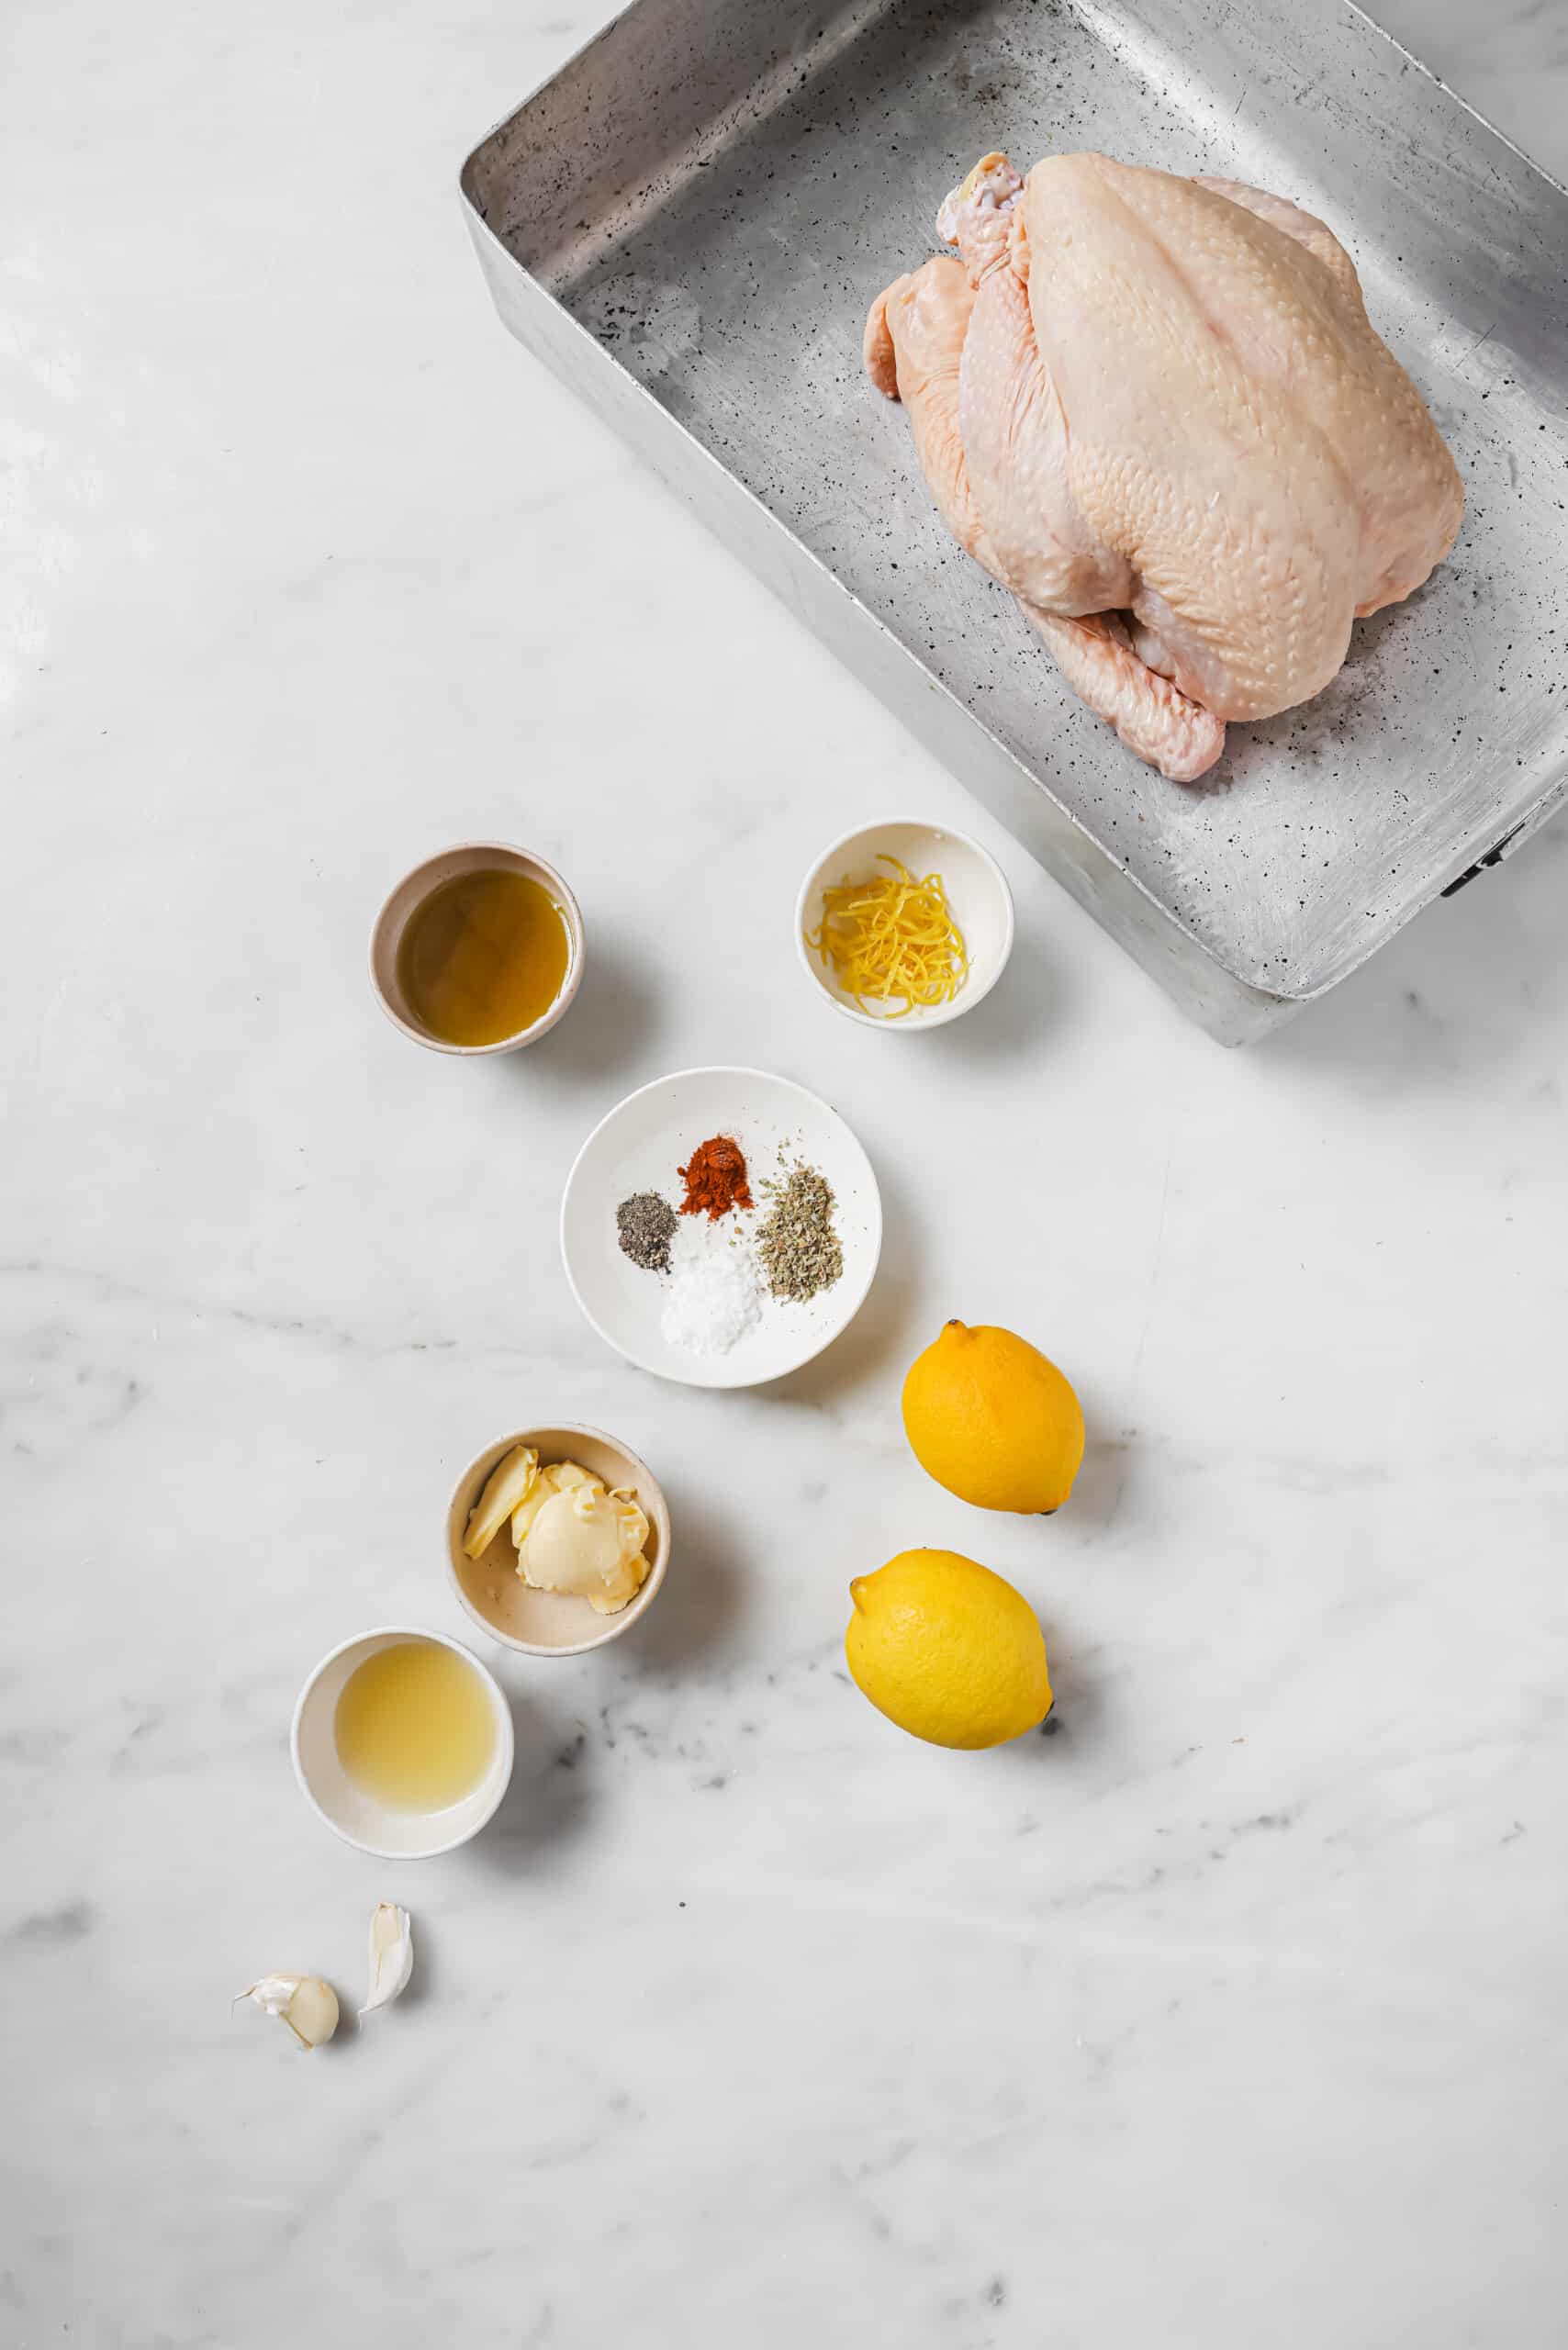 Ingredients for roasted chicken recipe.